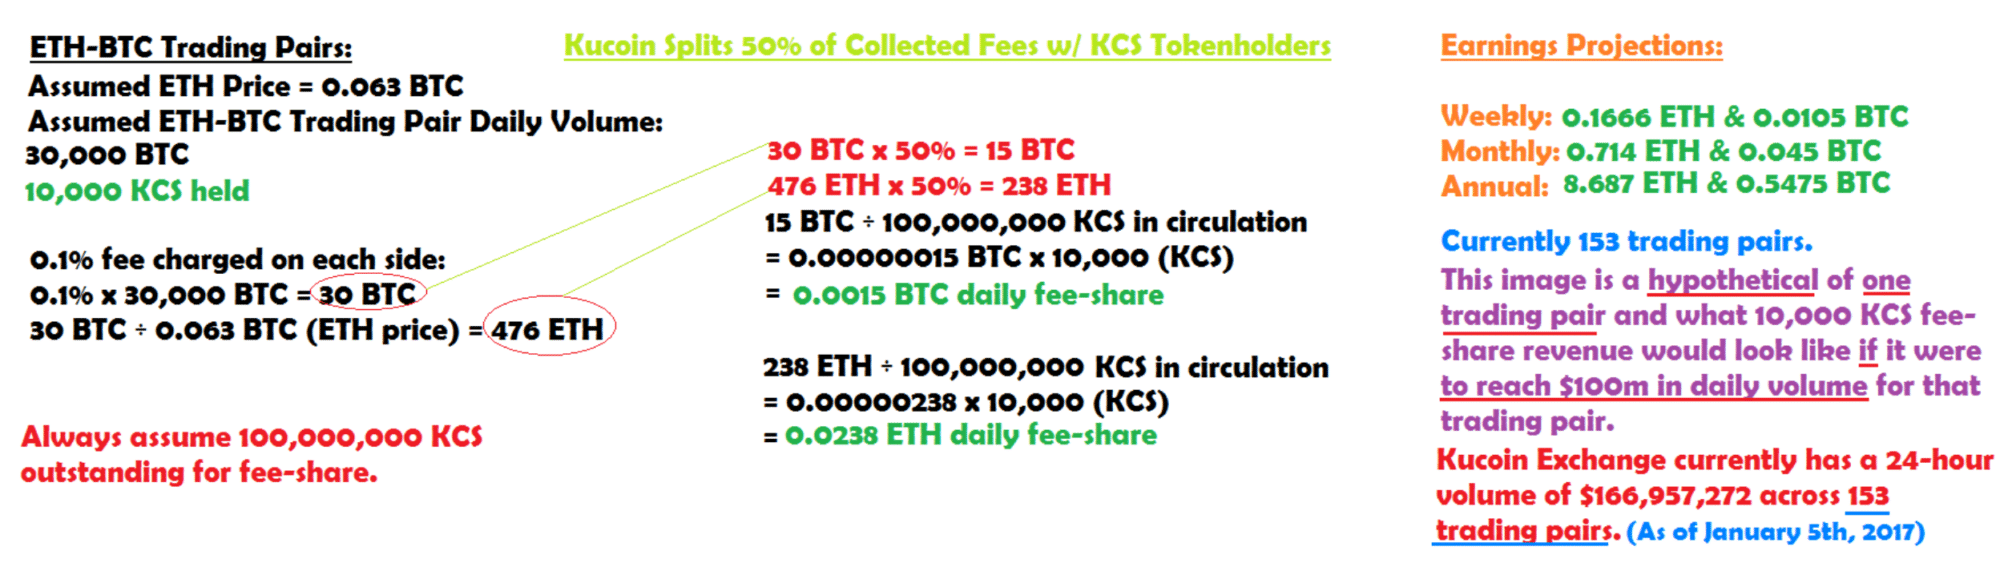 kucoin dividend example